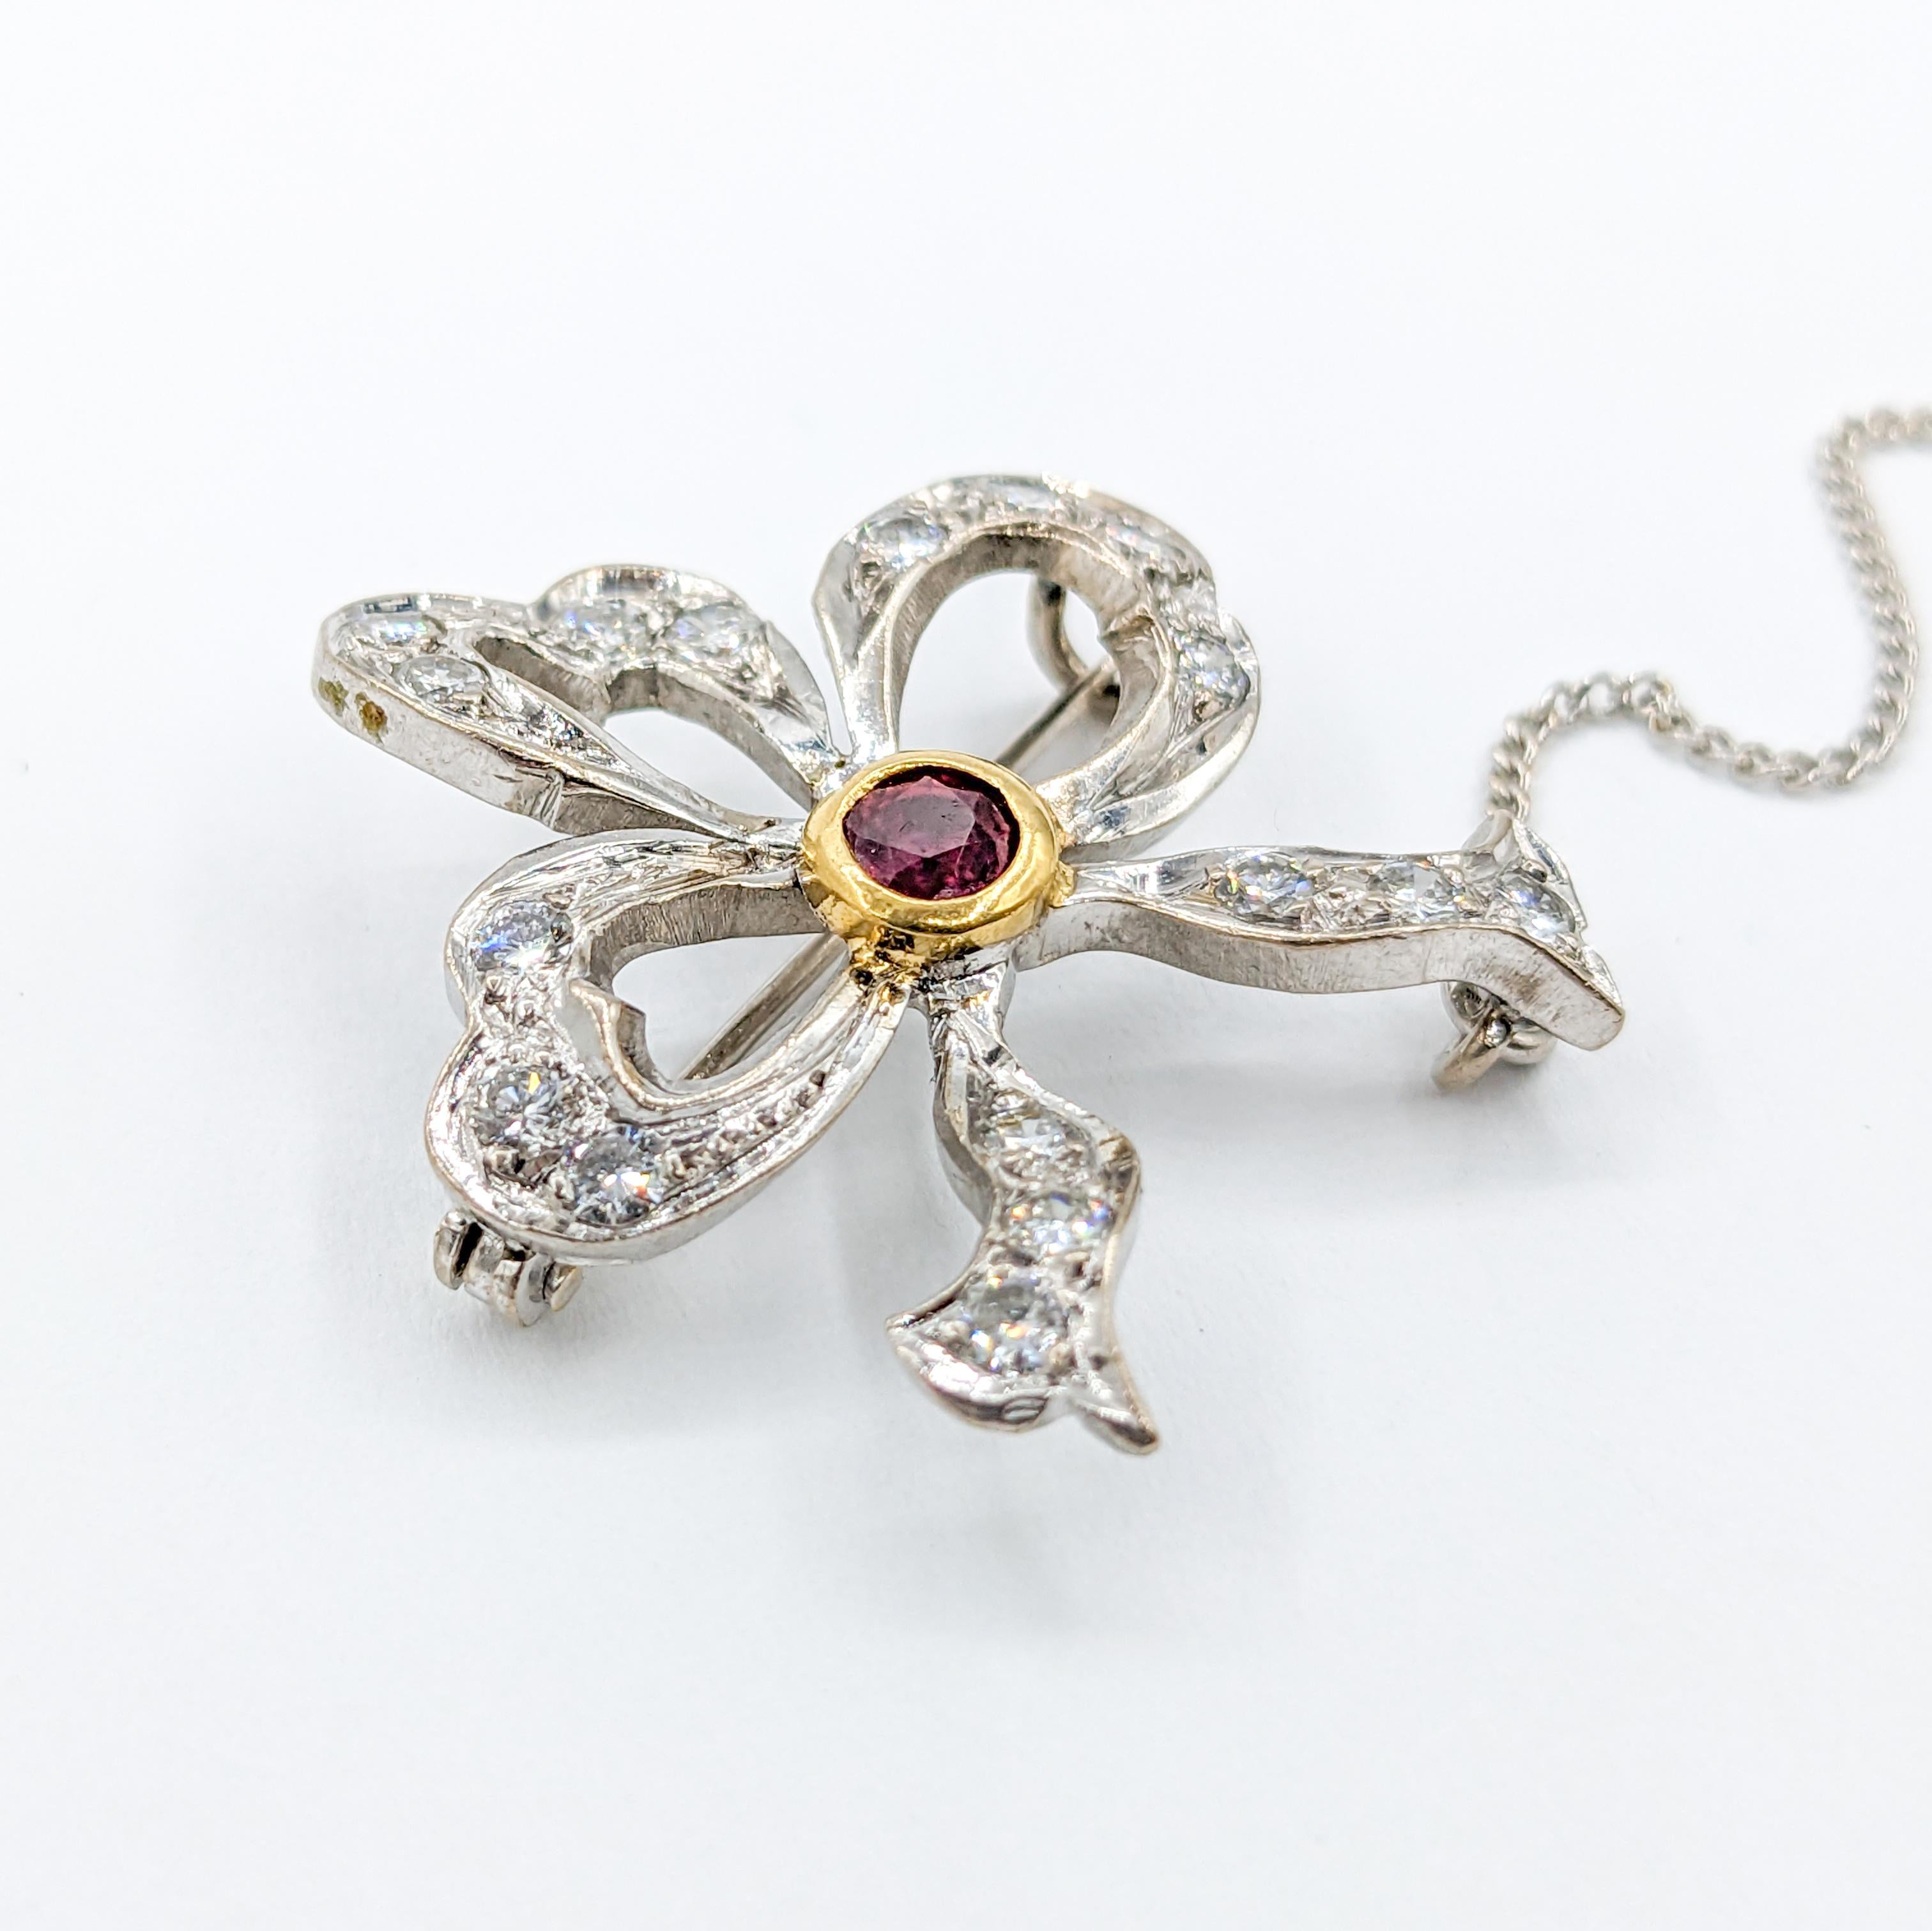 Platinum Ribbon Diamond & Ruby Brooch: A Timeless Expression of Romance

Unveil an era of classic allure with our romantic Platinum Ribbon Brooch. This vintage piece is meticulously crafted in radiant platinum with .50ctw round diamonds, each